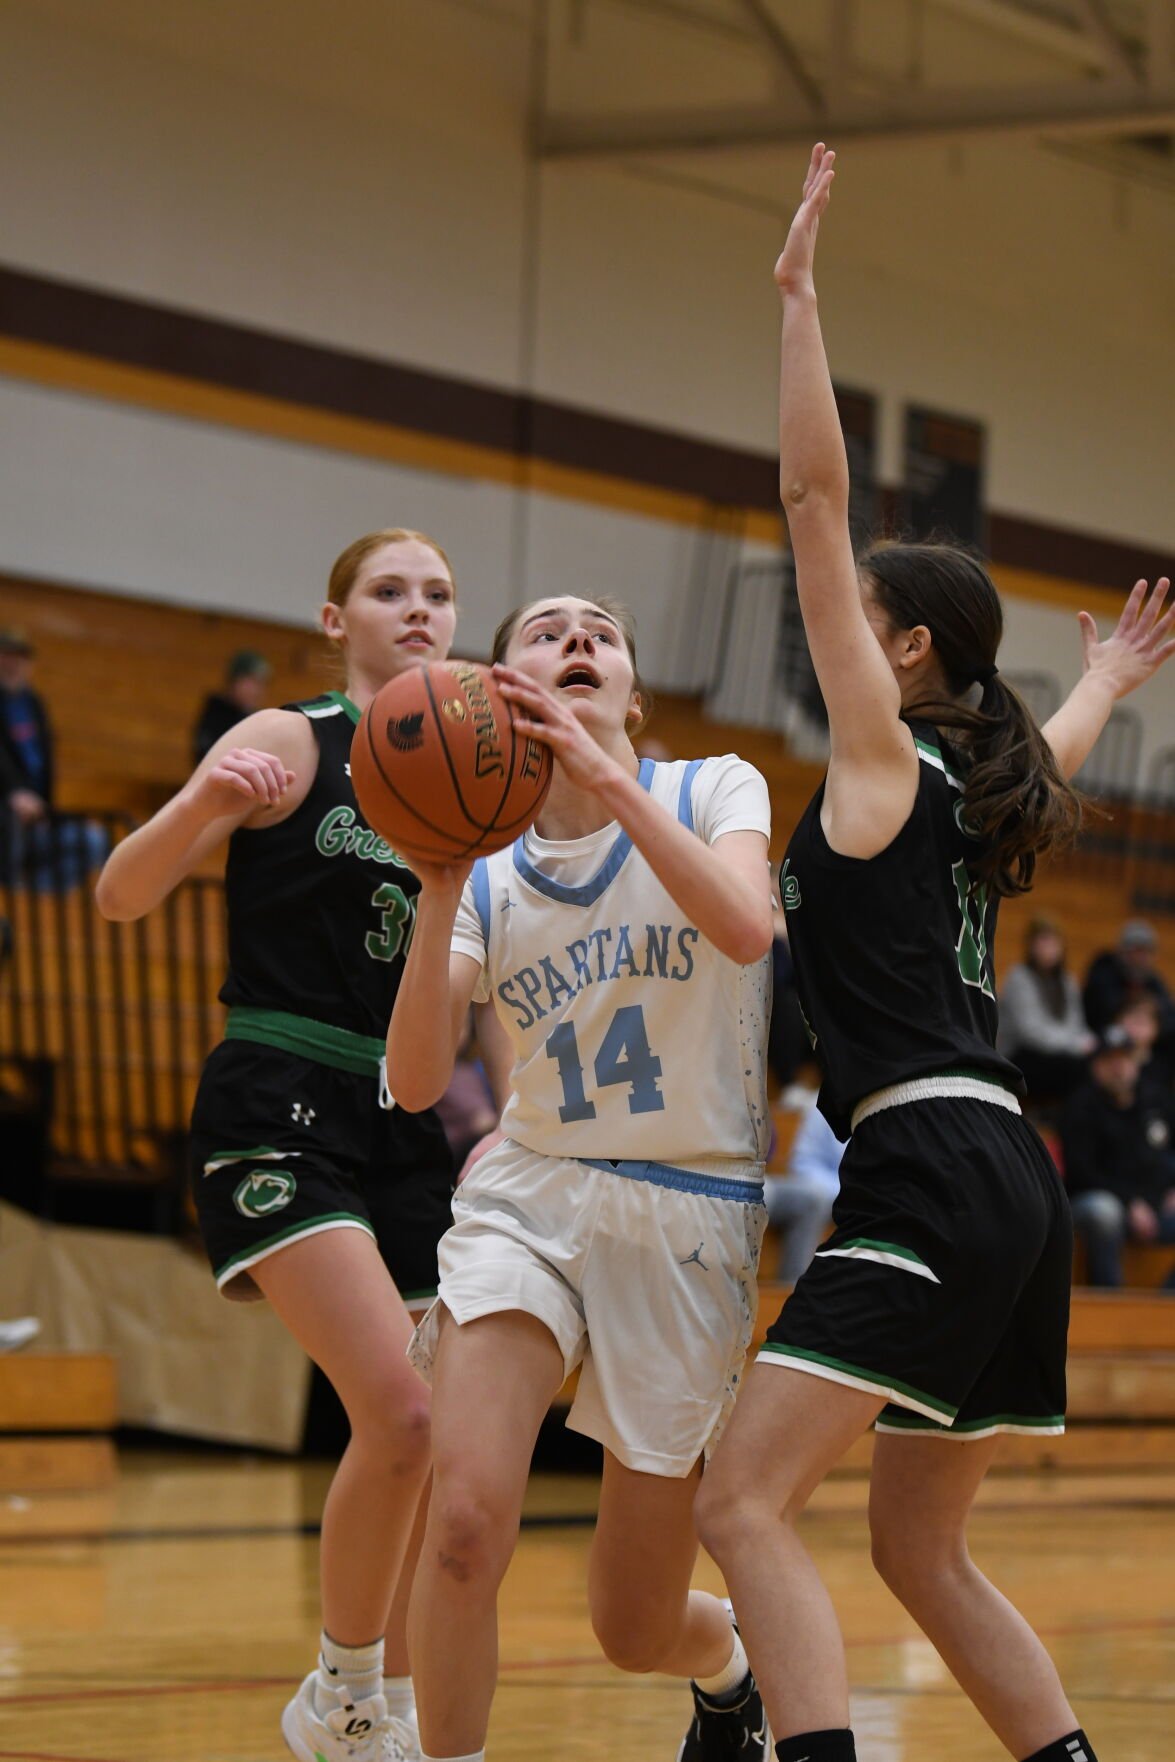 Greendale girls basketball team triumphs over West Bend West with a 60-35 victory